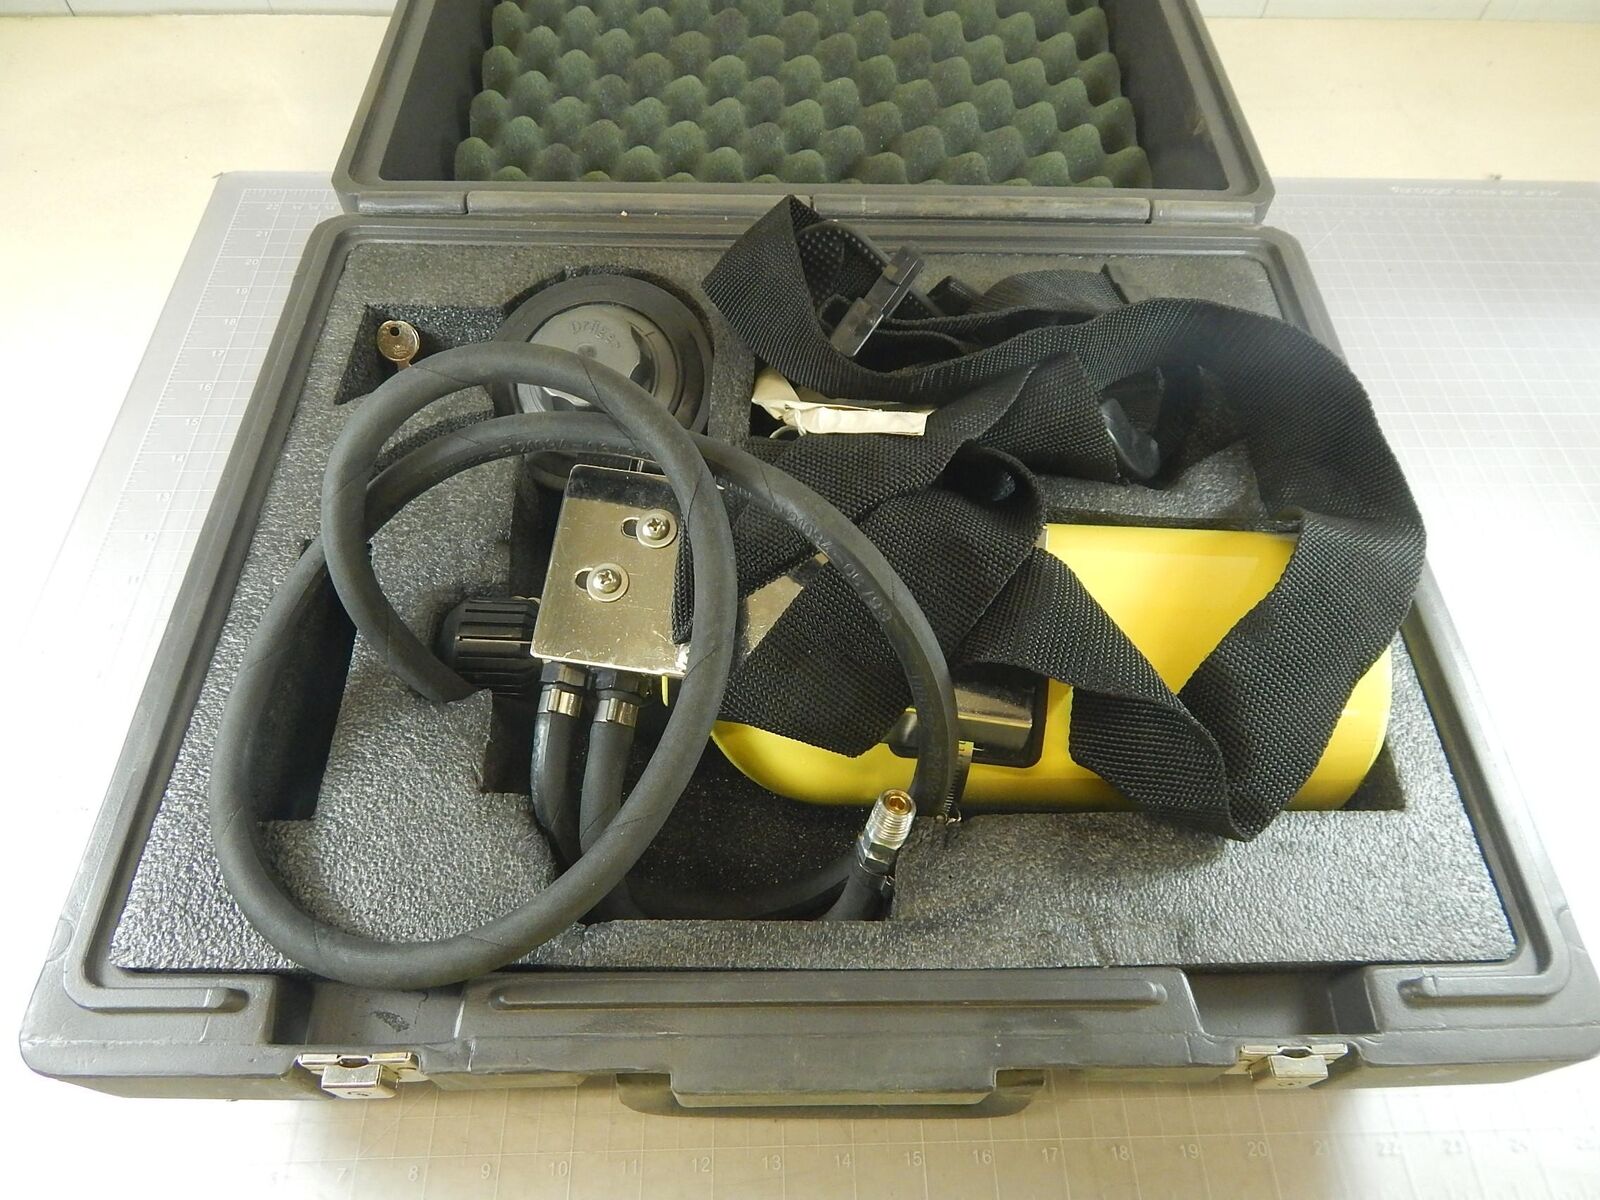 Drager 4052486, 4053217, 4053273, 4052413 Compressed Air Breathing Apparatus